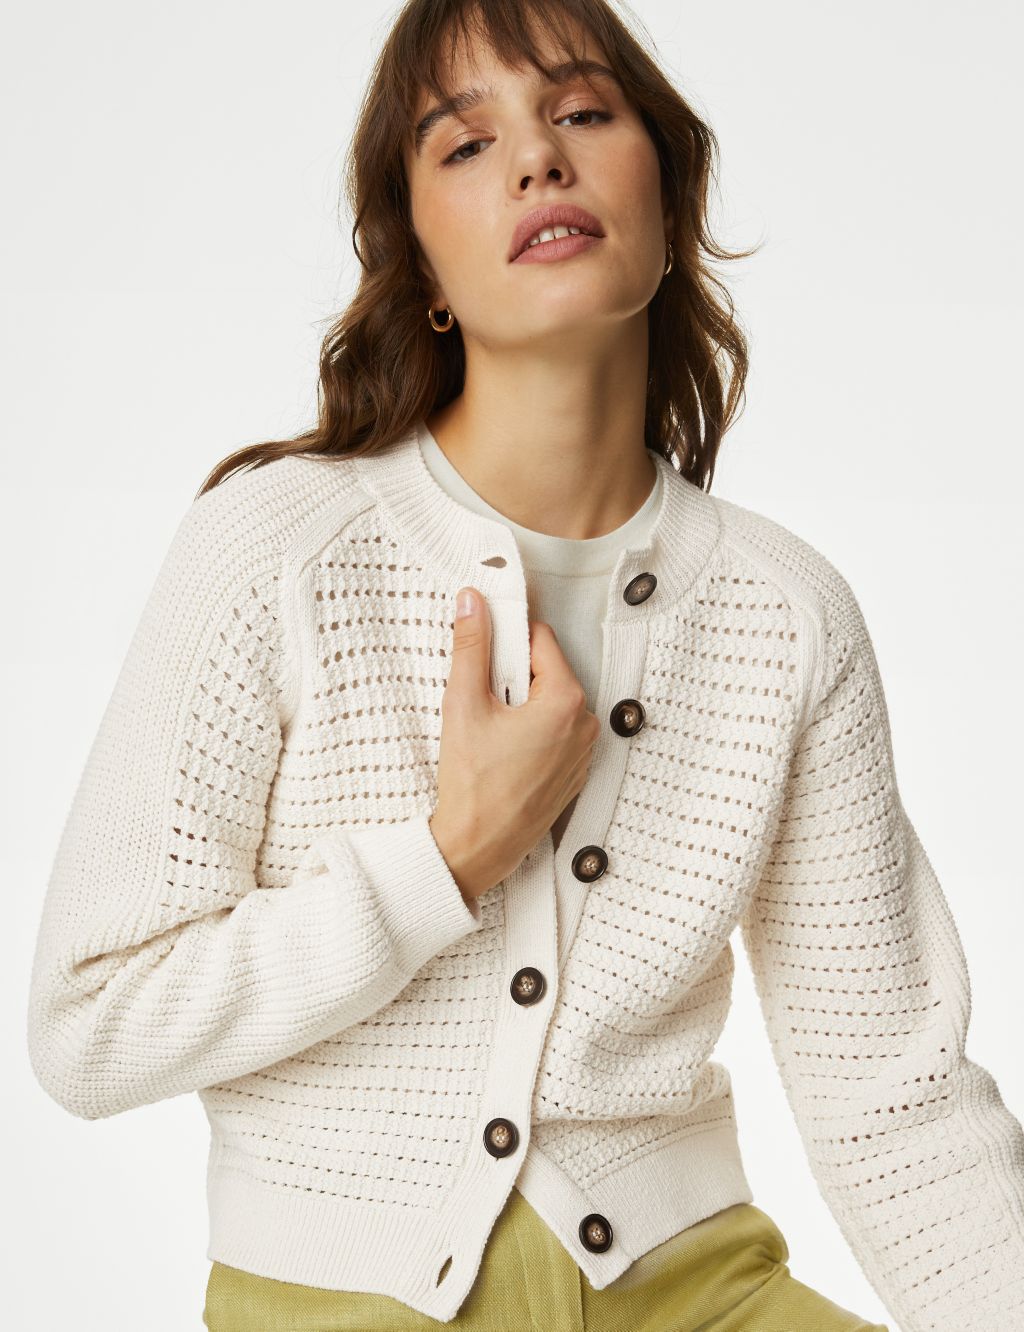 Save Up To 50% on Cardigans, Cardigan Clearance